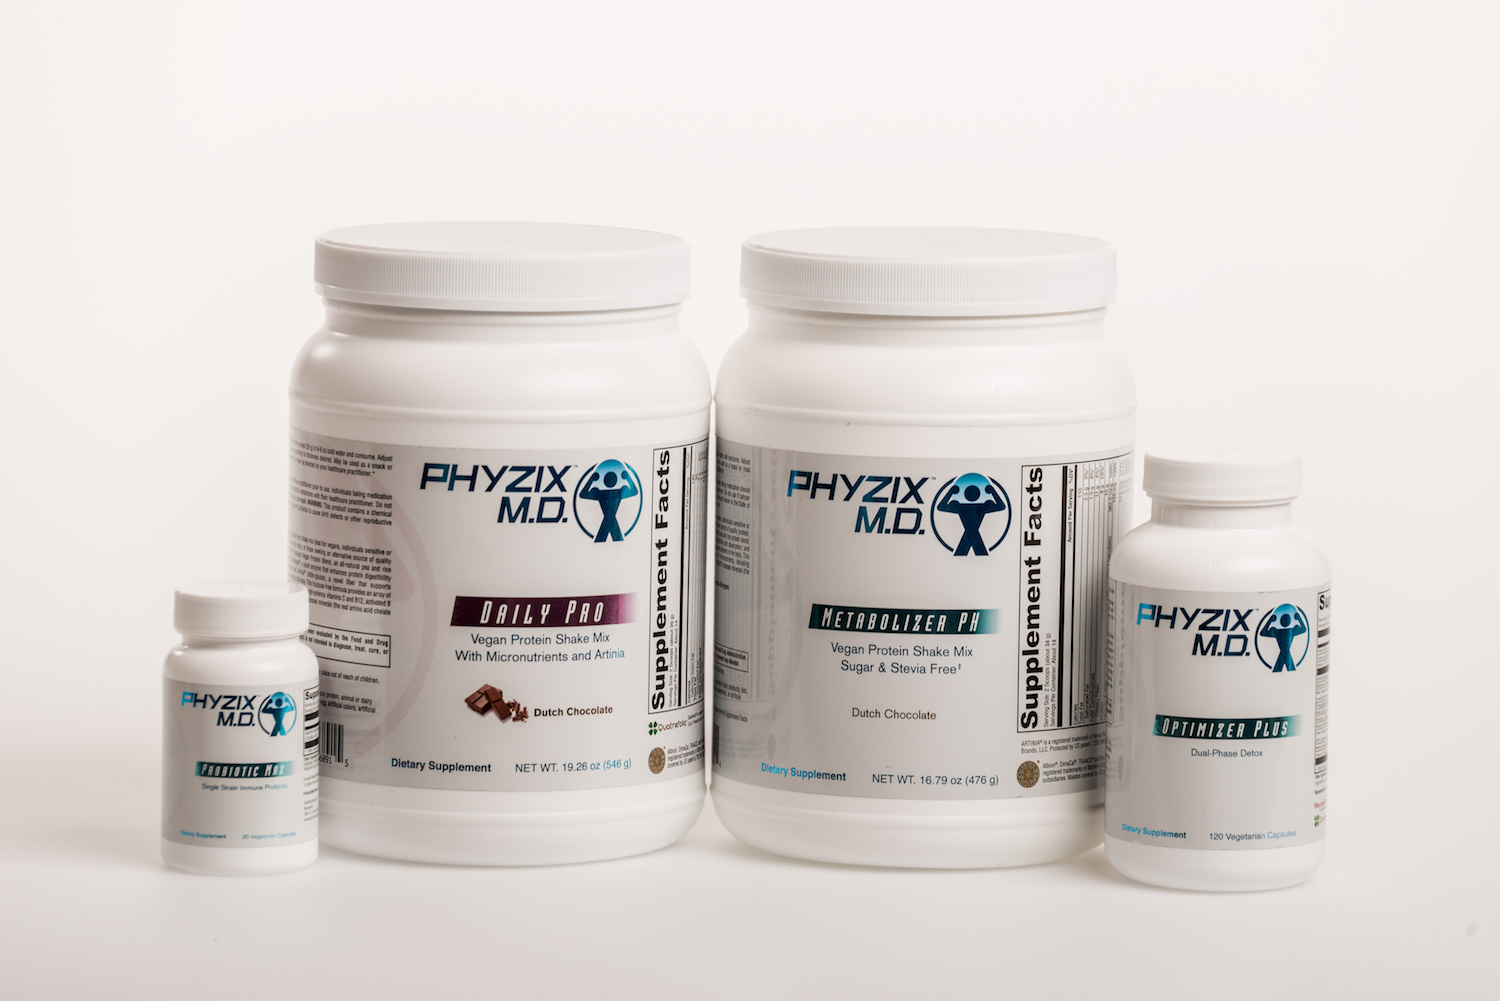 Our Phyzix MD products are a great way to share Bonvera with family and friends. 